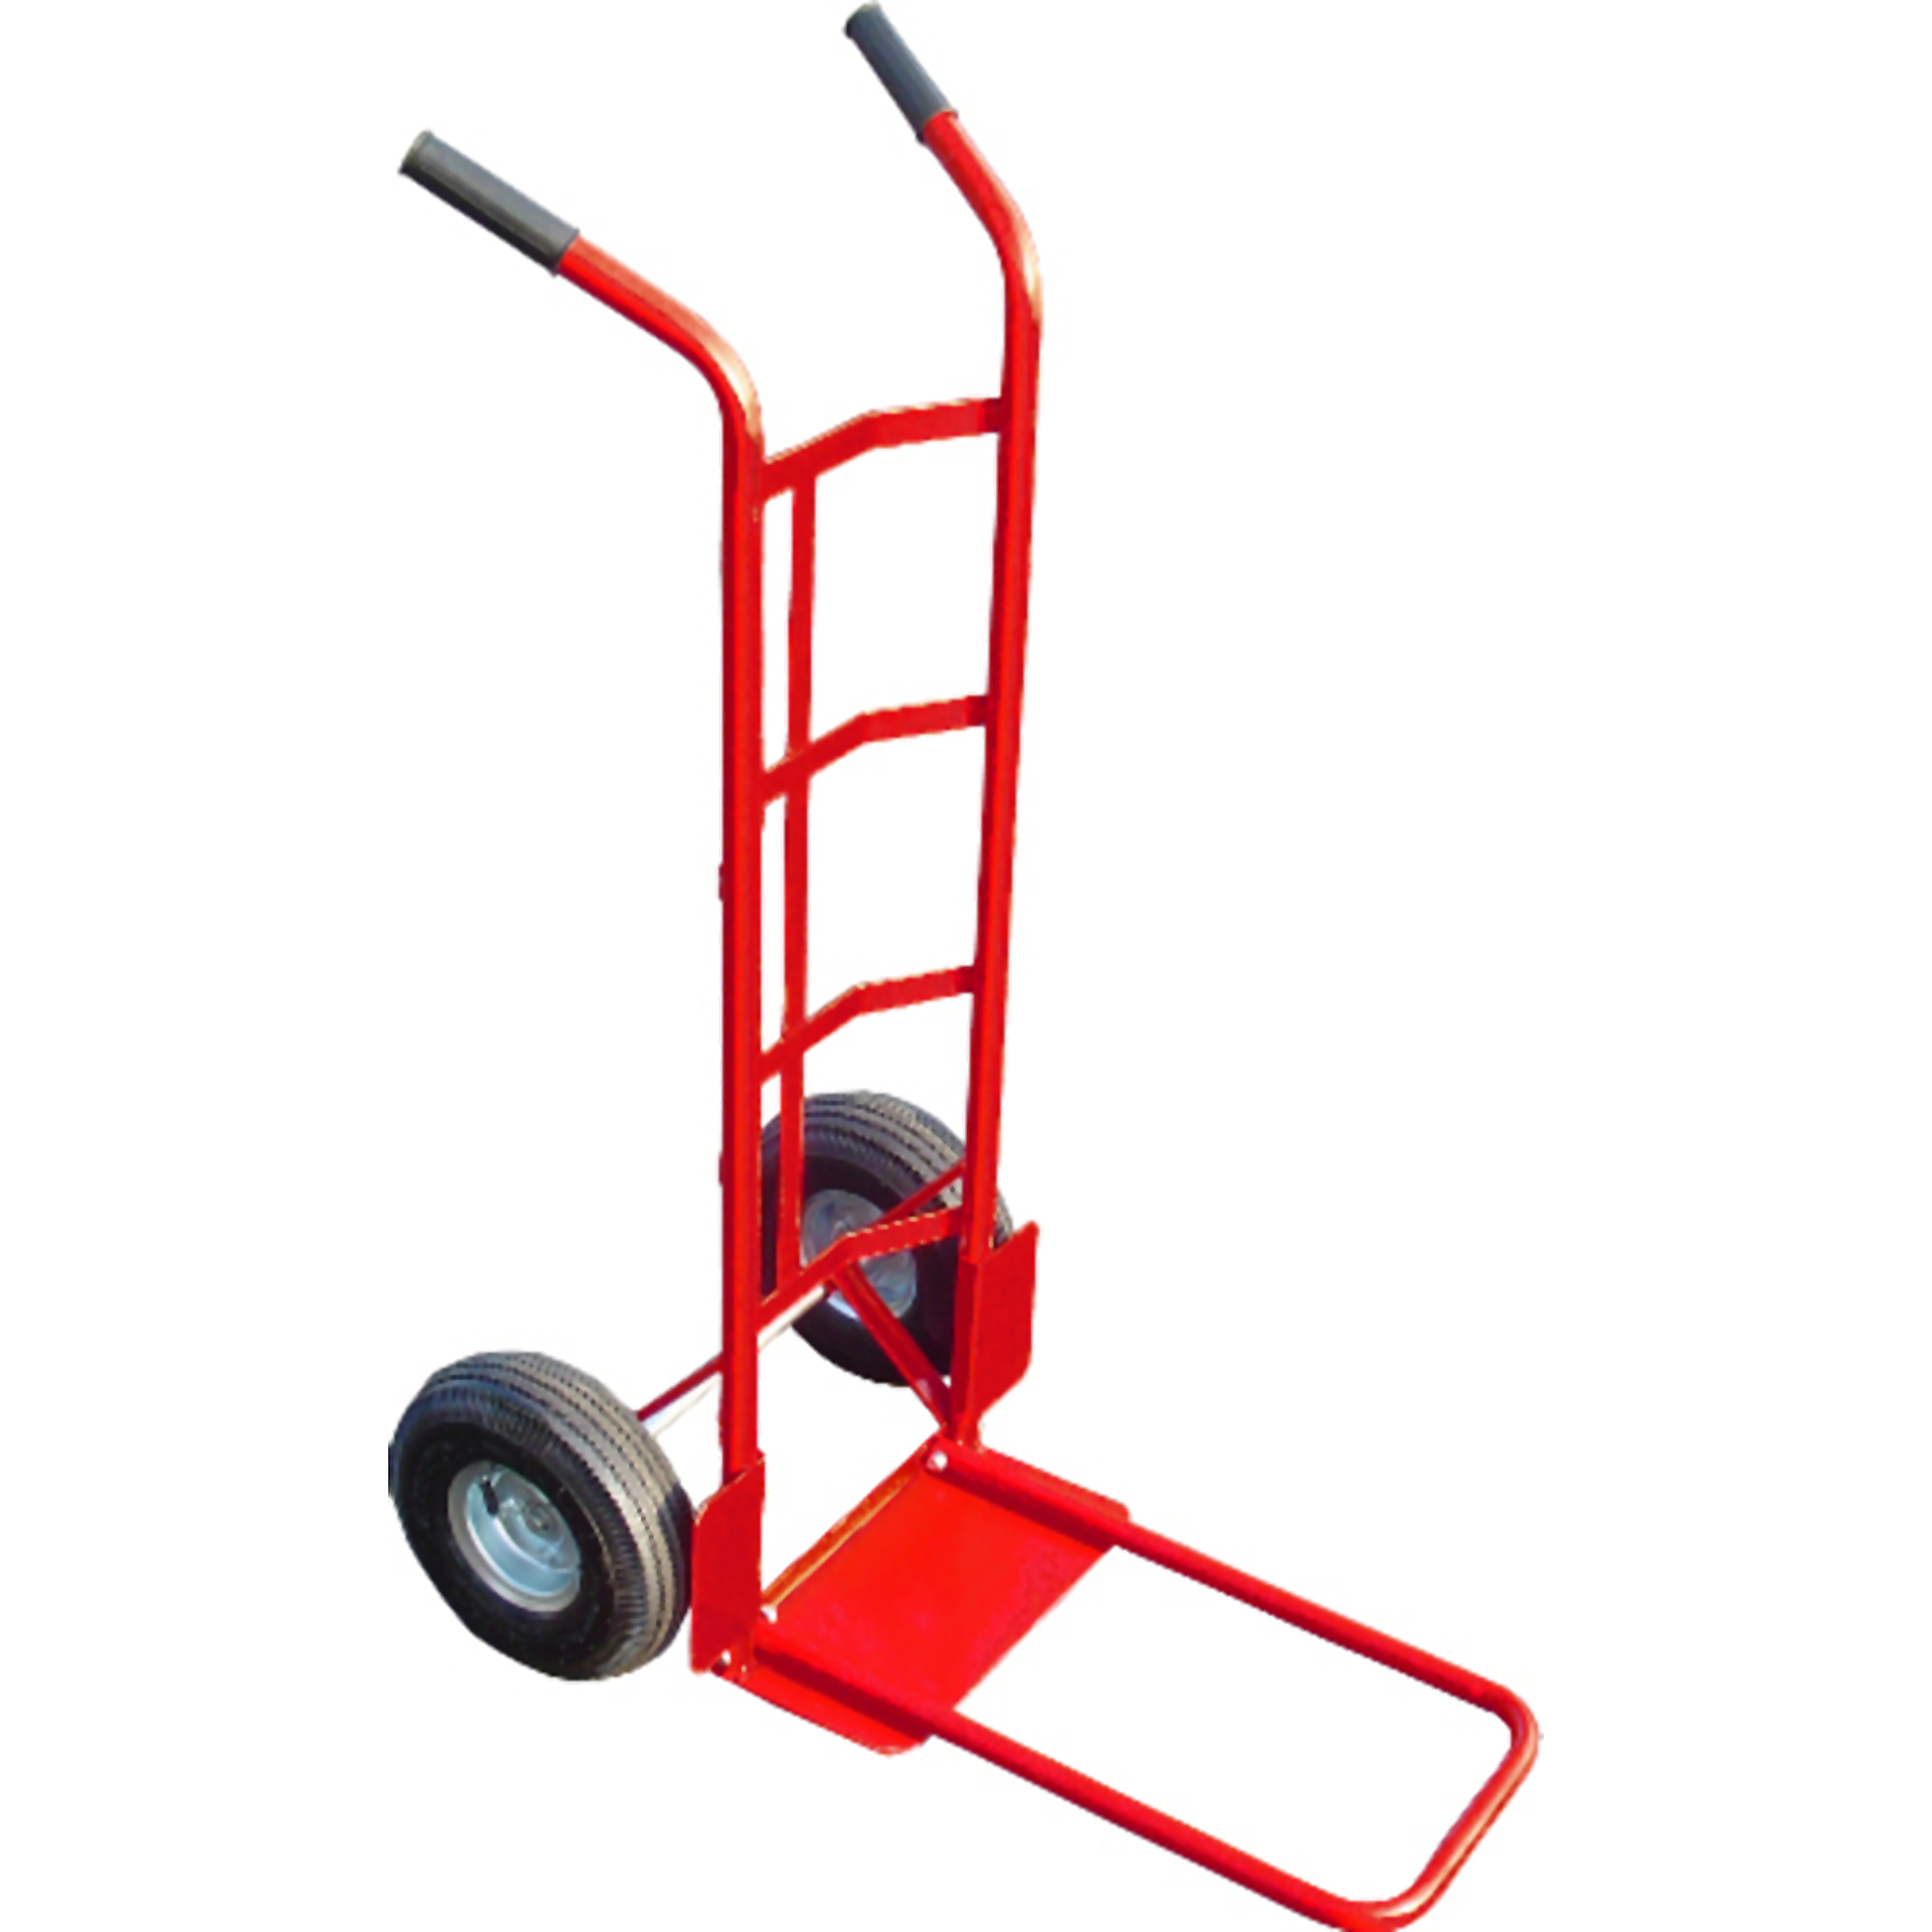 American Power Pull, Sack Truck Solid Tires, Load Capacity 600 lb, Material Steel, Model 3439-1